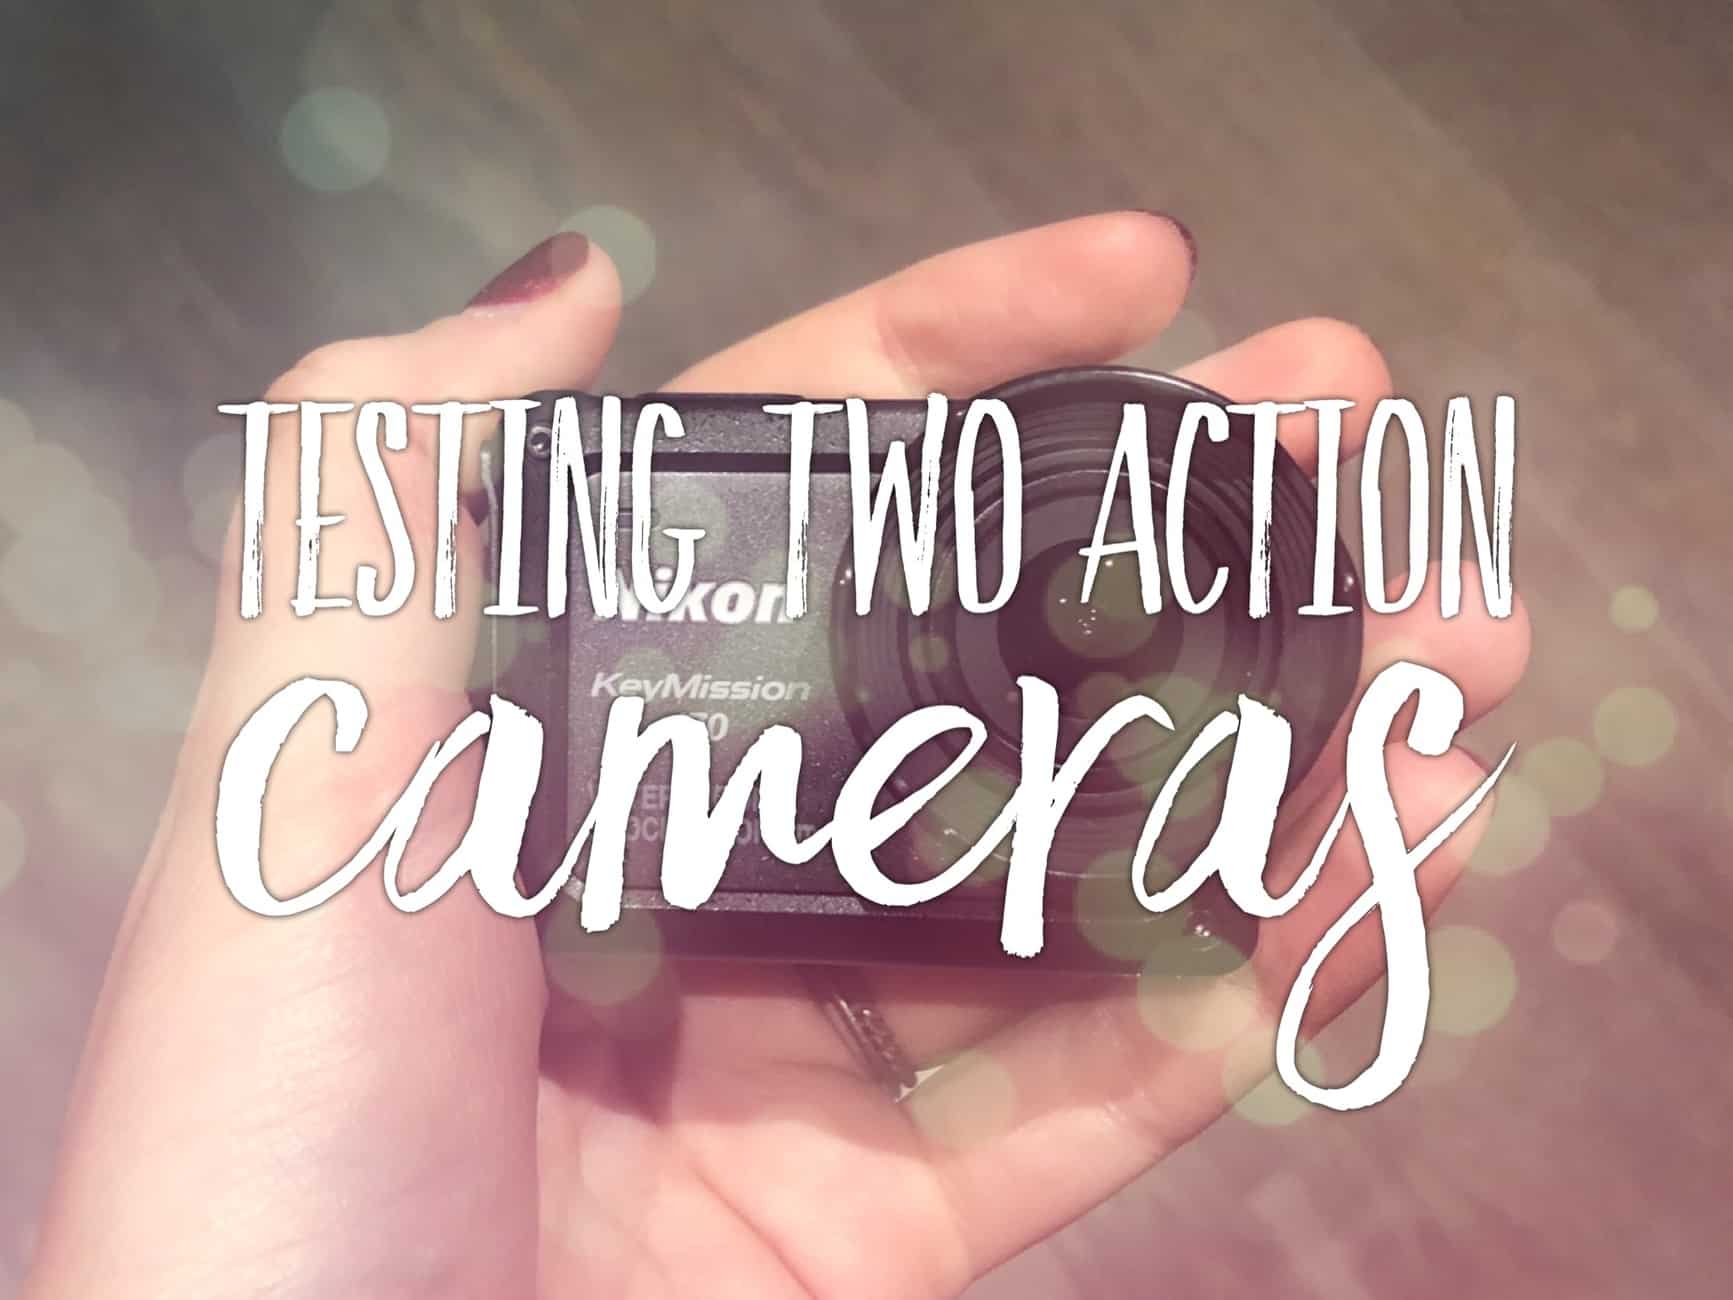 Two action cameras: Nikon Keymission 170 and Keymission 80 comparison